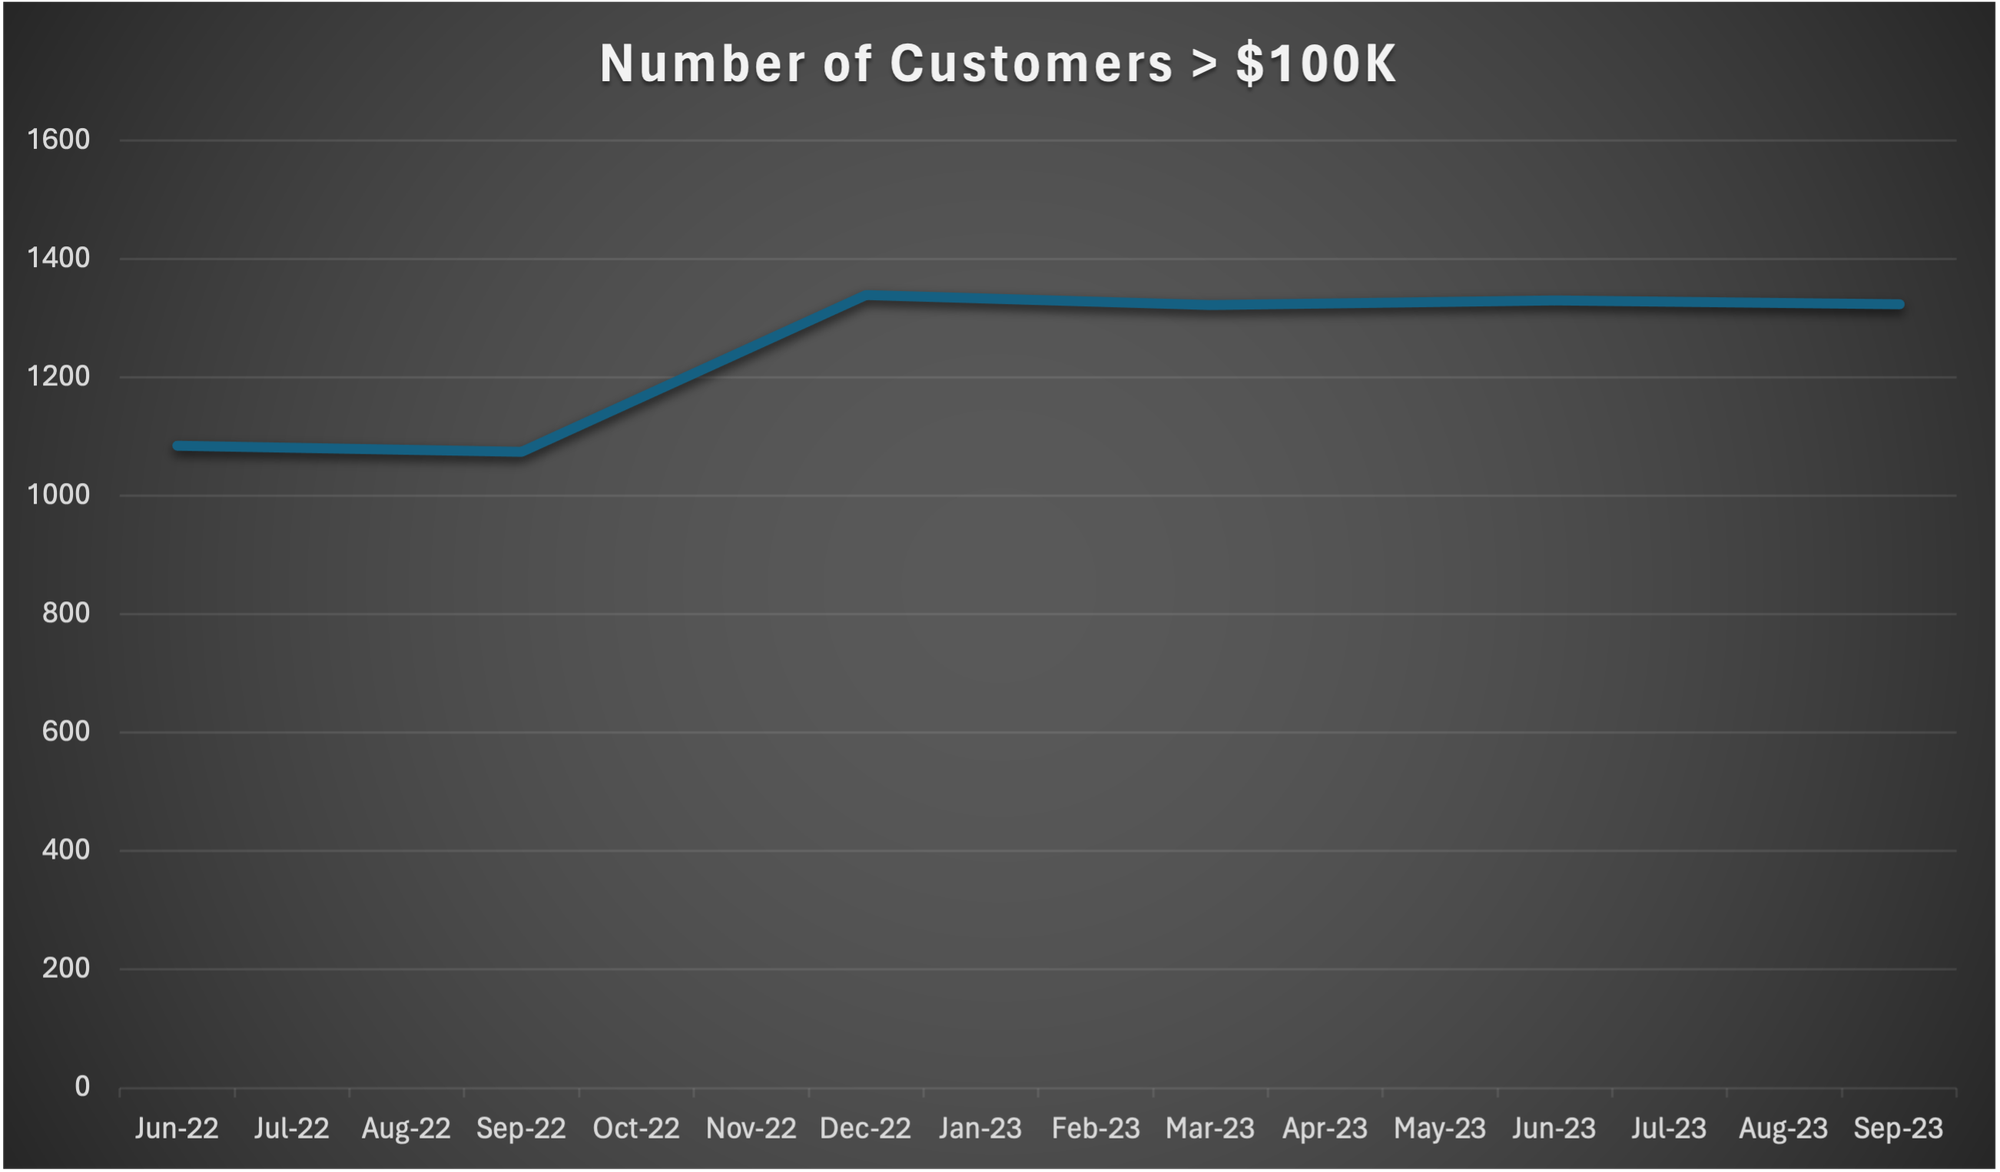 Number of Customers > $100K - Unity